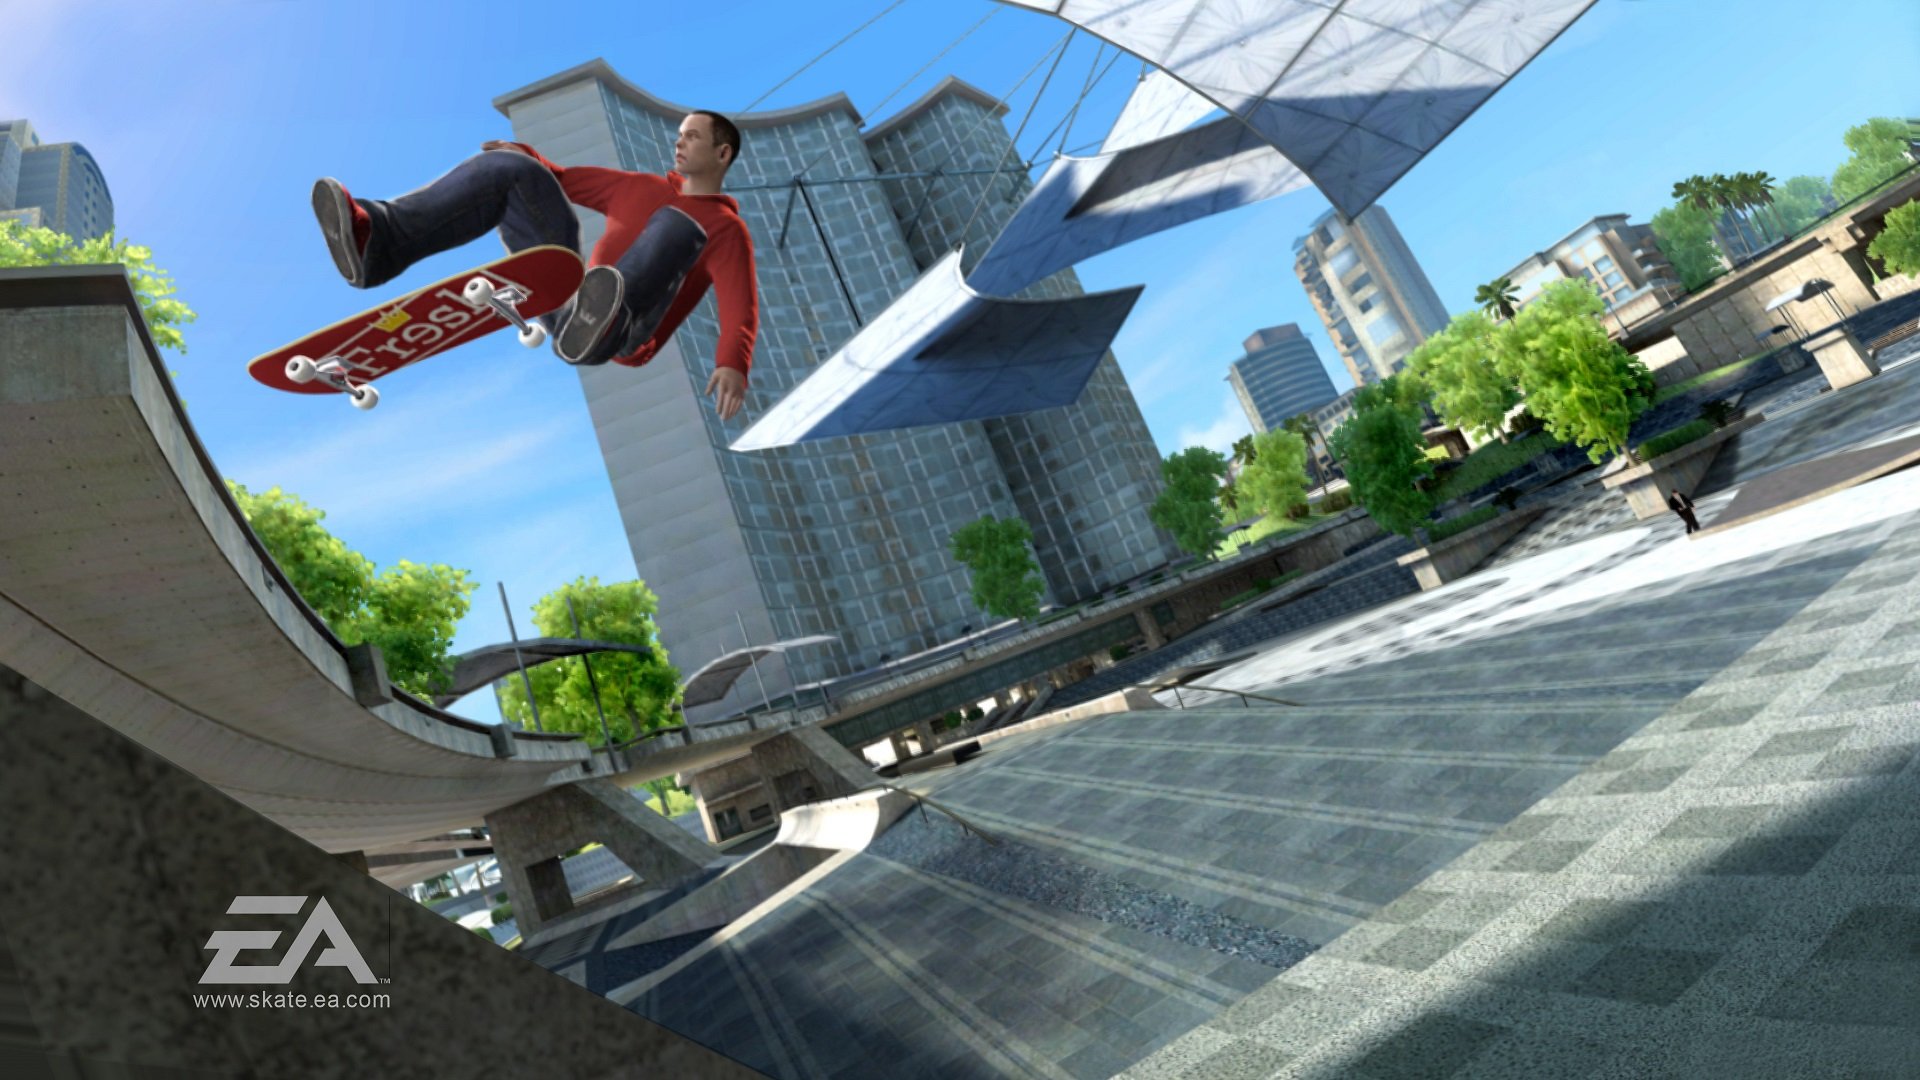 Express Samarbejde Tillid This ain't no fakie: Skate 3 got added to EA Access today – Destructoid